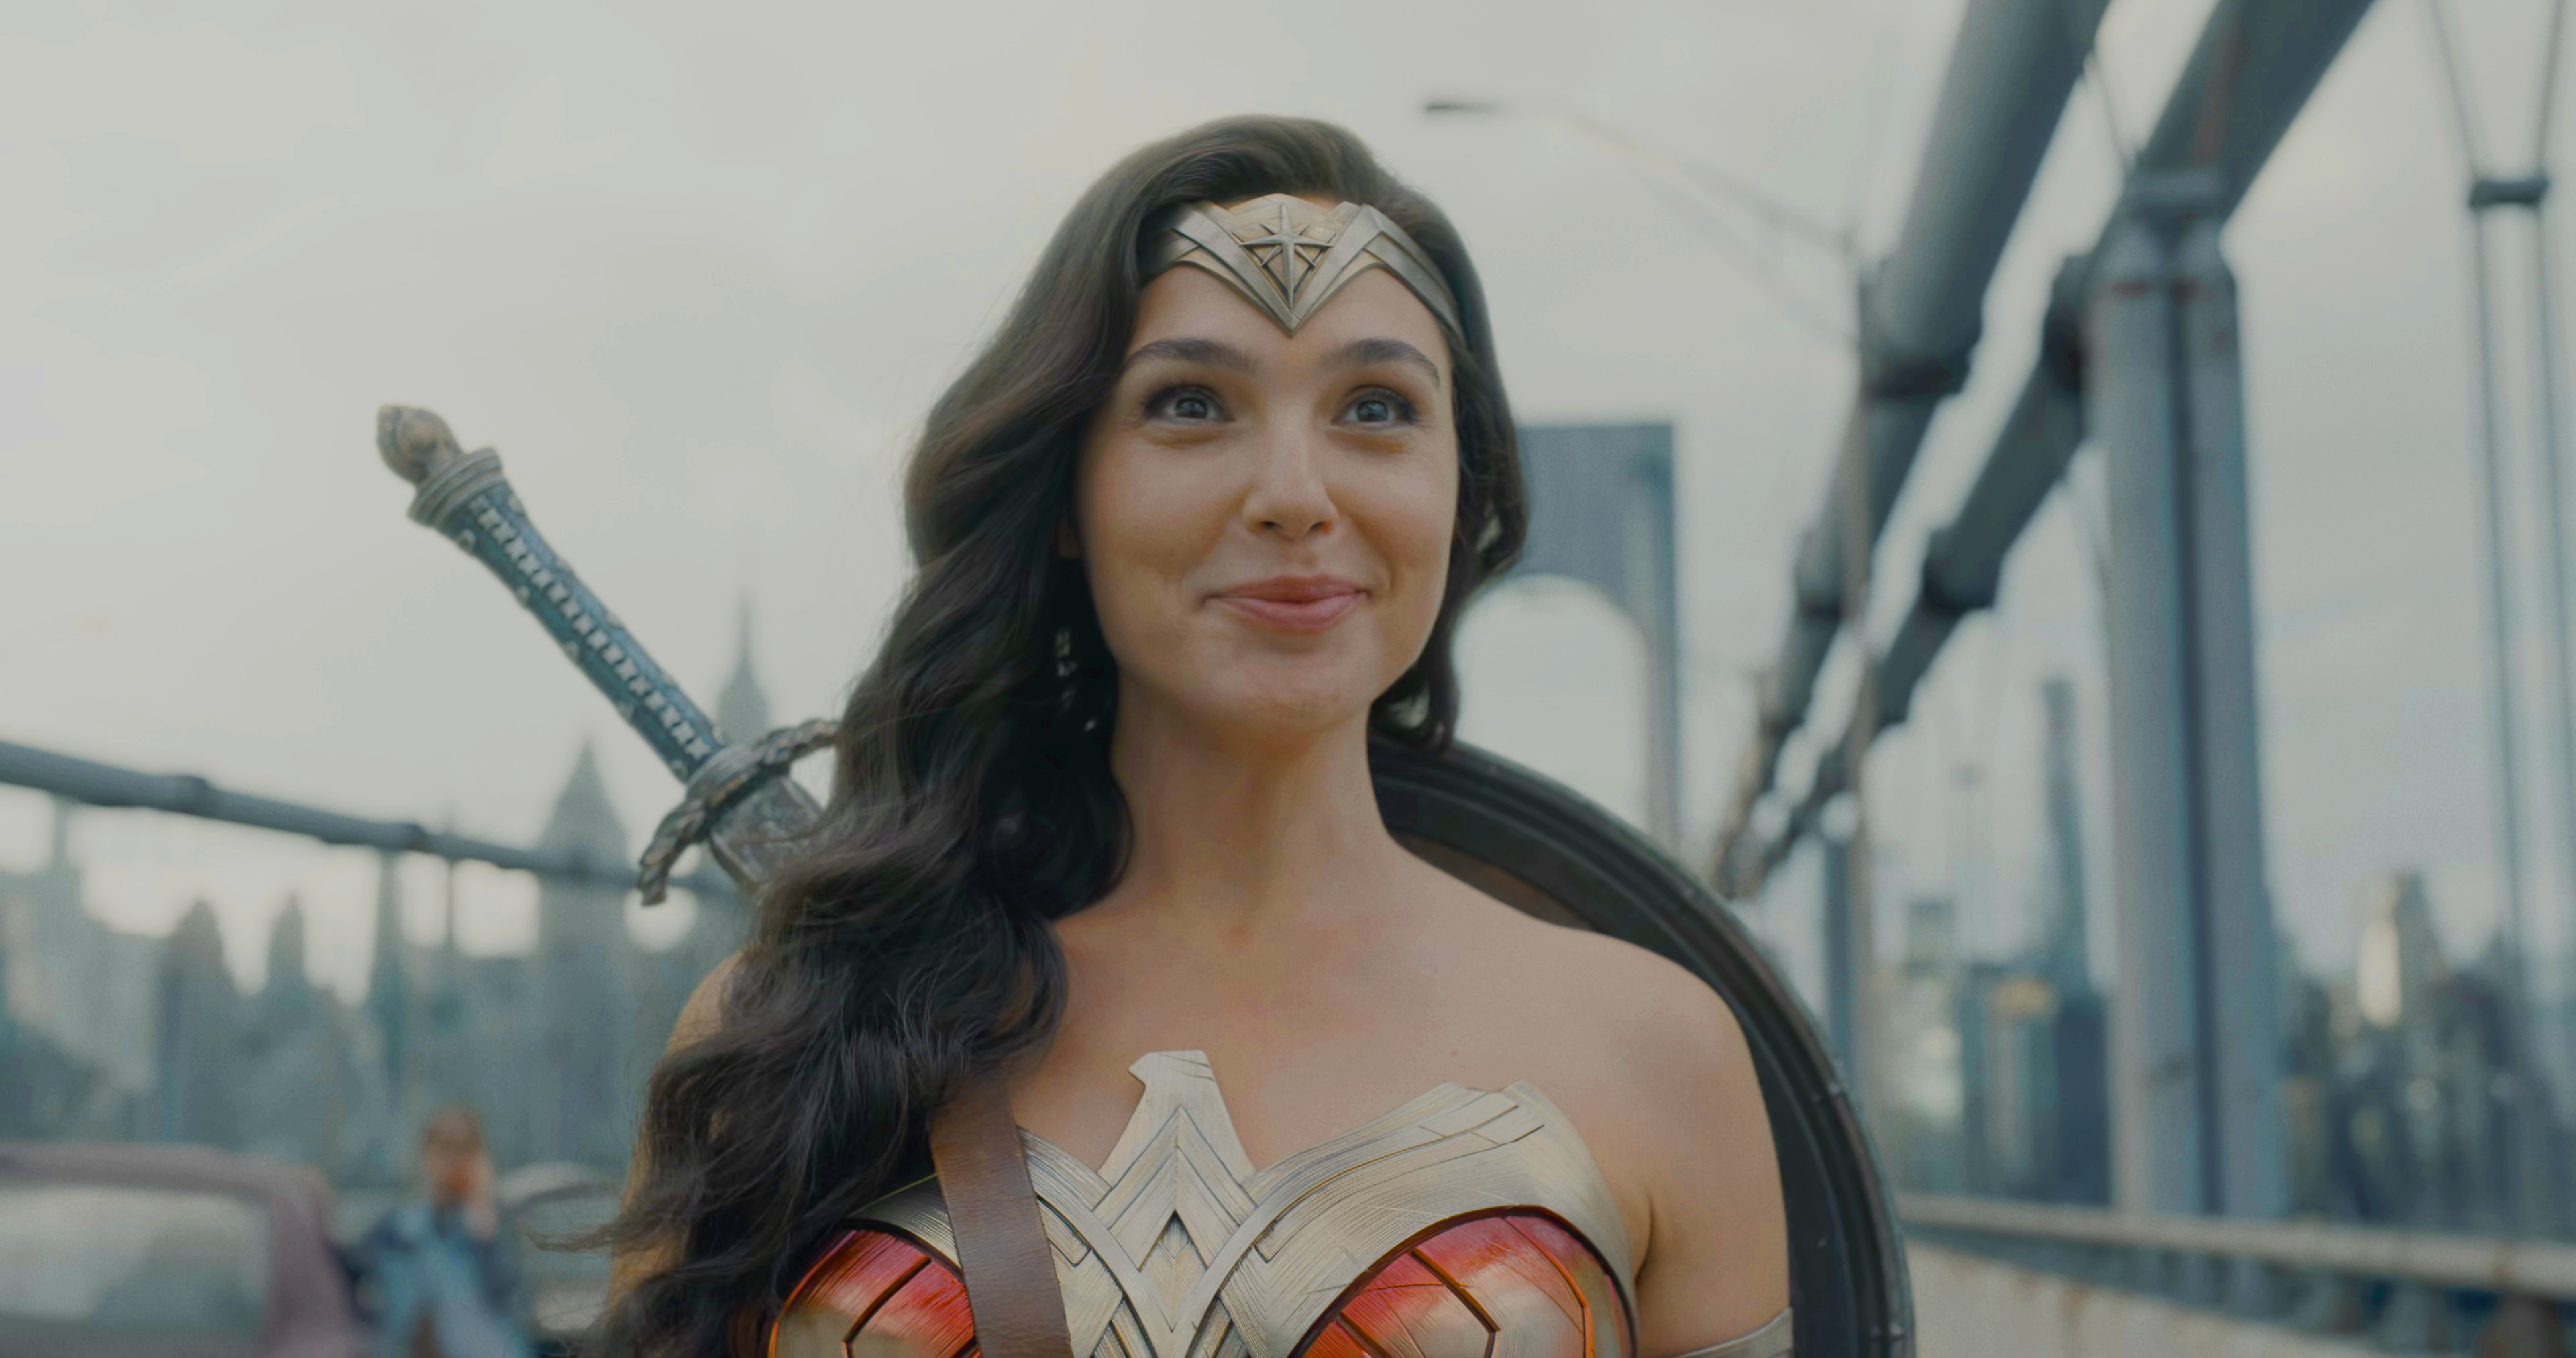 Wonder Woman (Gal Gadot) flashes a smile after sitting through a spot of Marvel humor in The Flash (2023), Warner Bros. Discovery